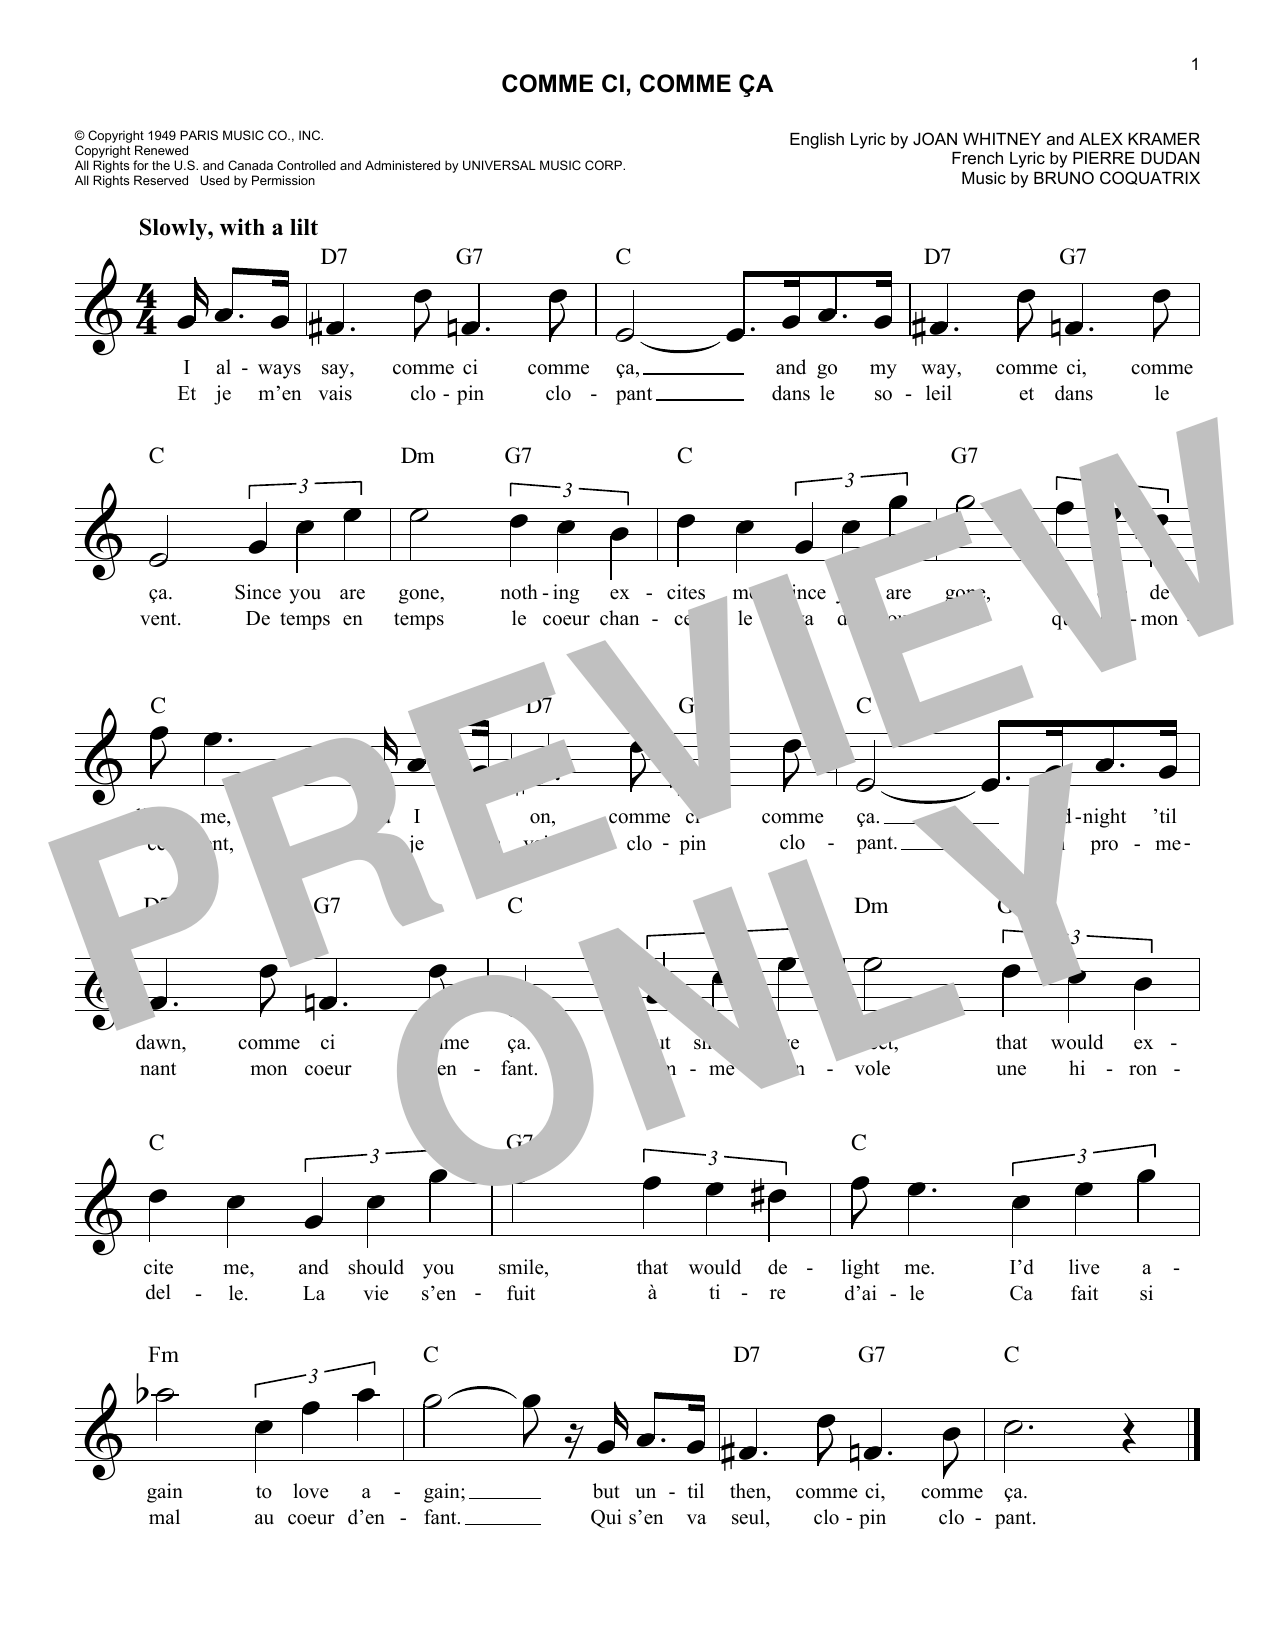 Download Pierre Dudan (orig. French) Comme Ci, Comme Ca Sheet Music